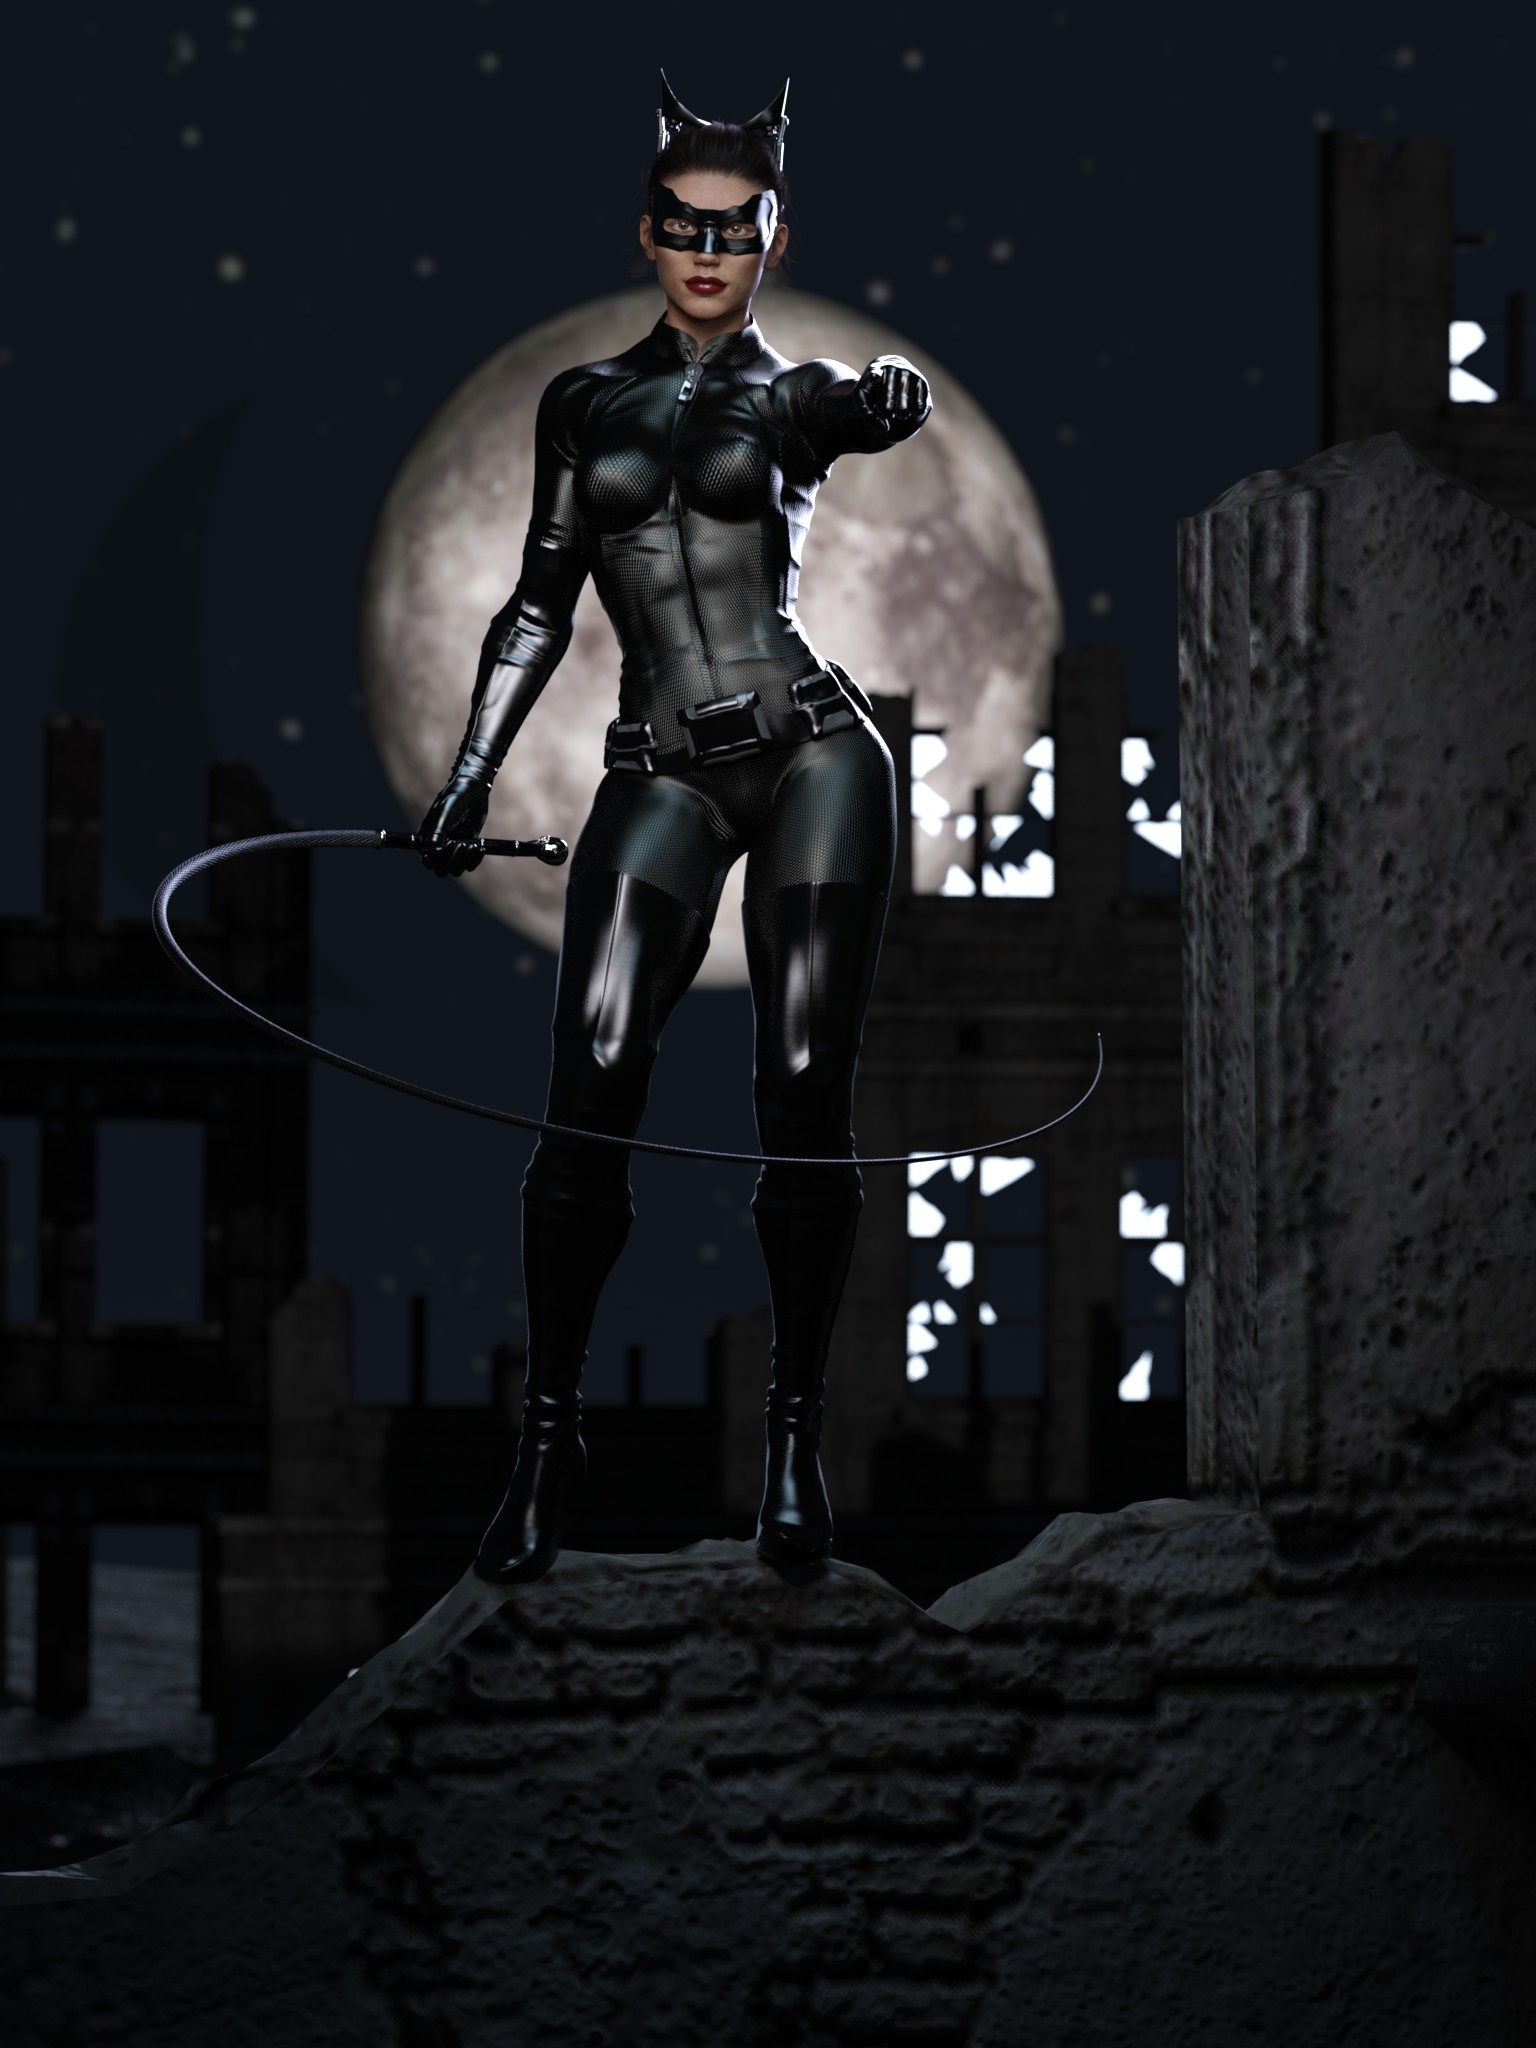 Catwoman on a ledge.